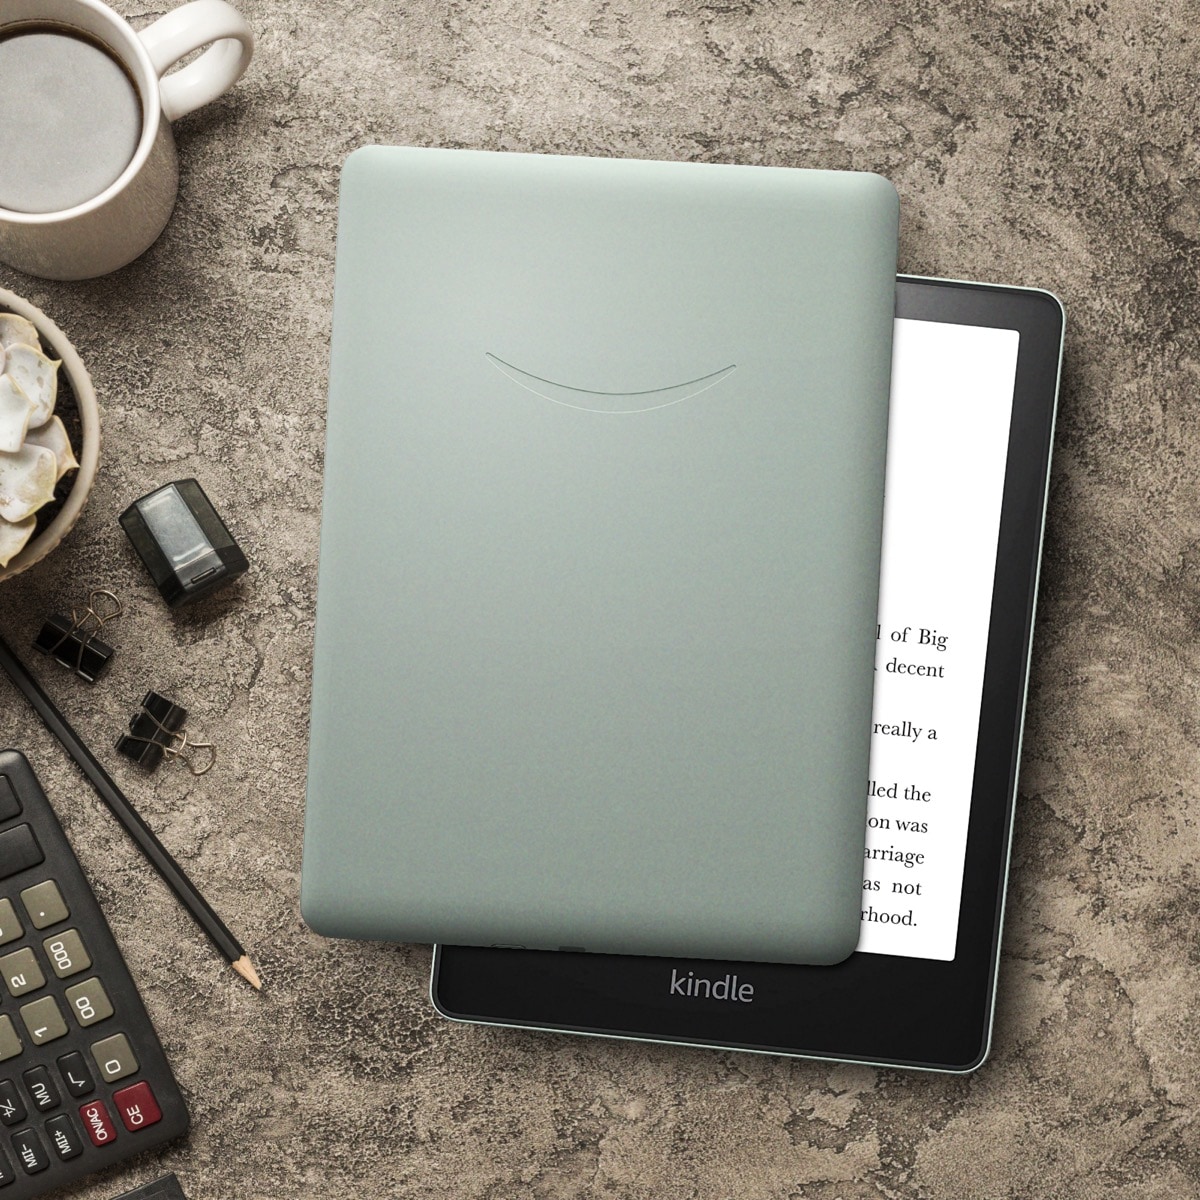 Kindle Paperwhite now comes in Agave Green and Denim, prices are cut by even $50